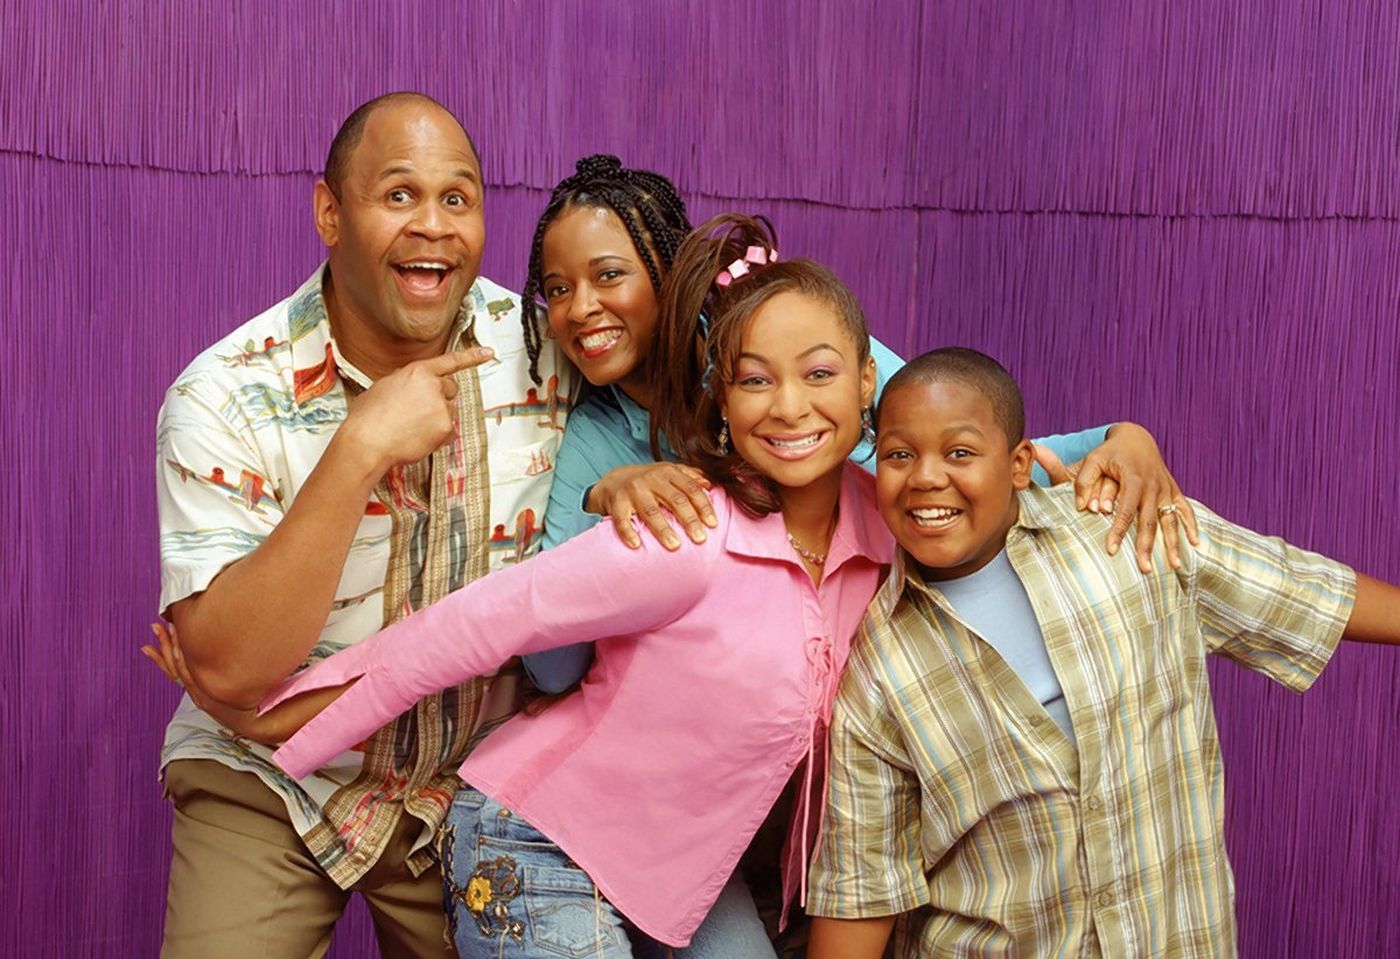 The cast of 'That's So Raven' including Raven-Symone